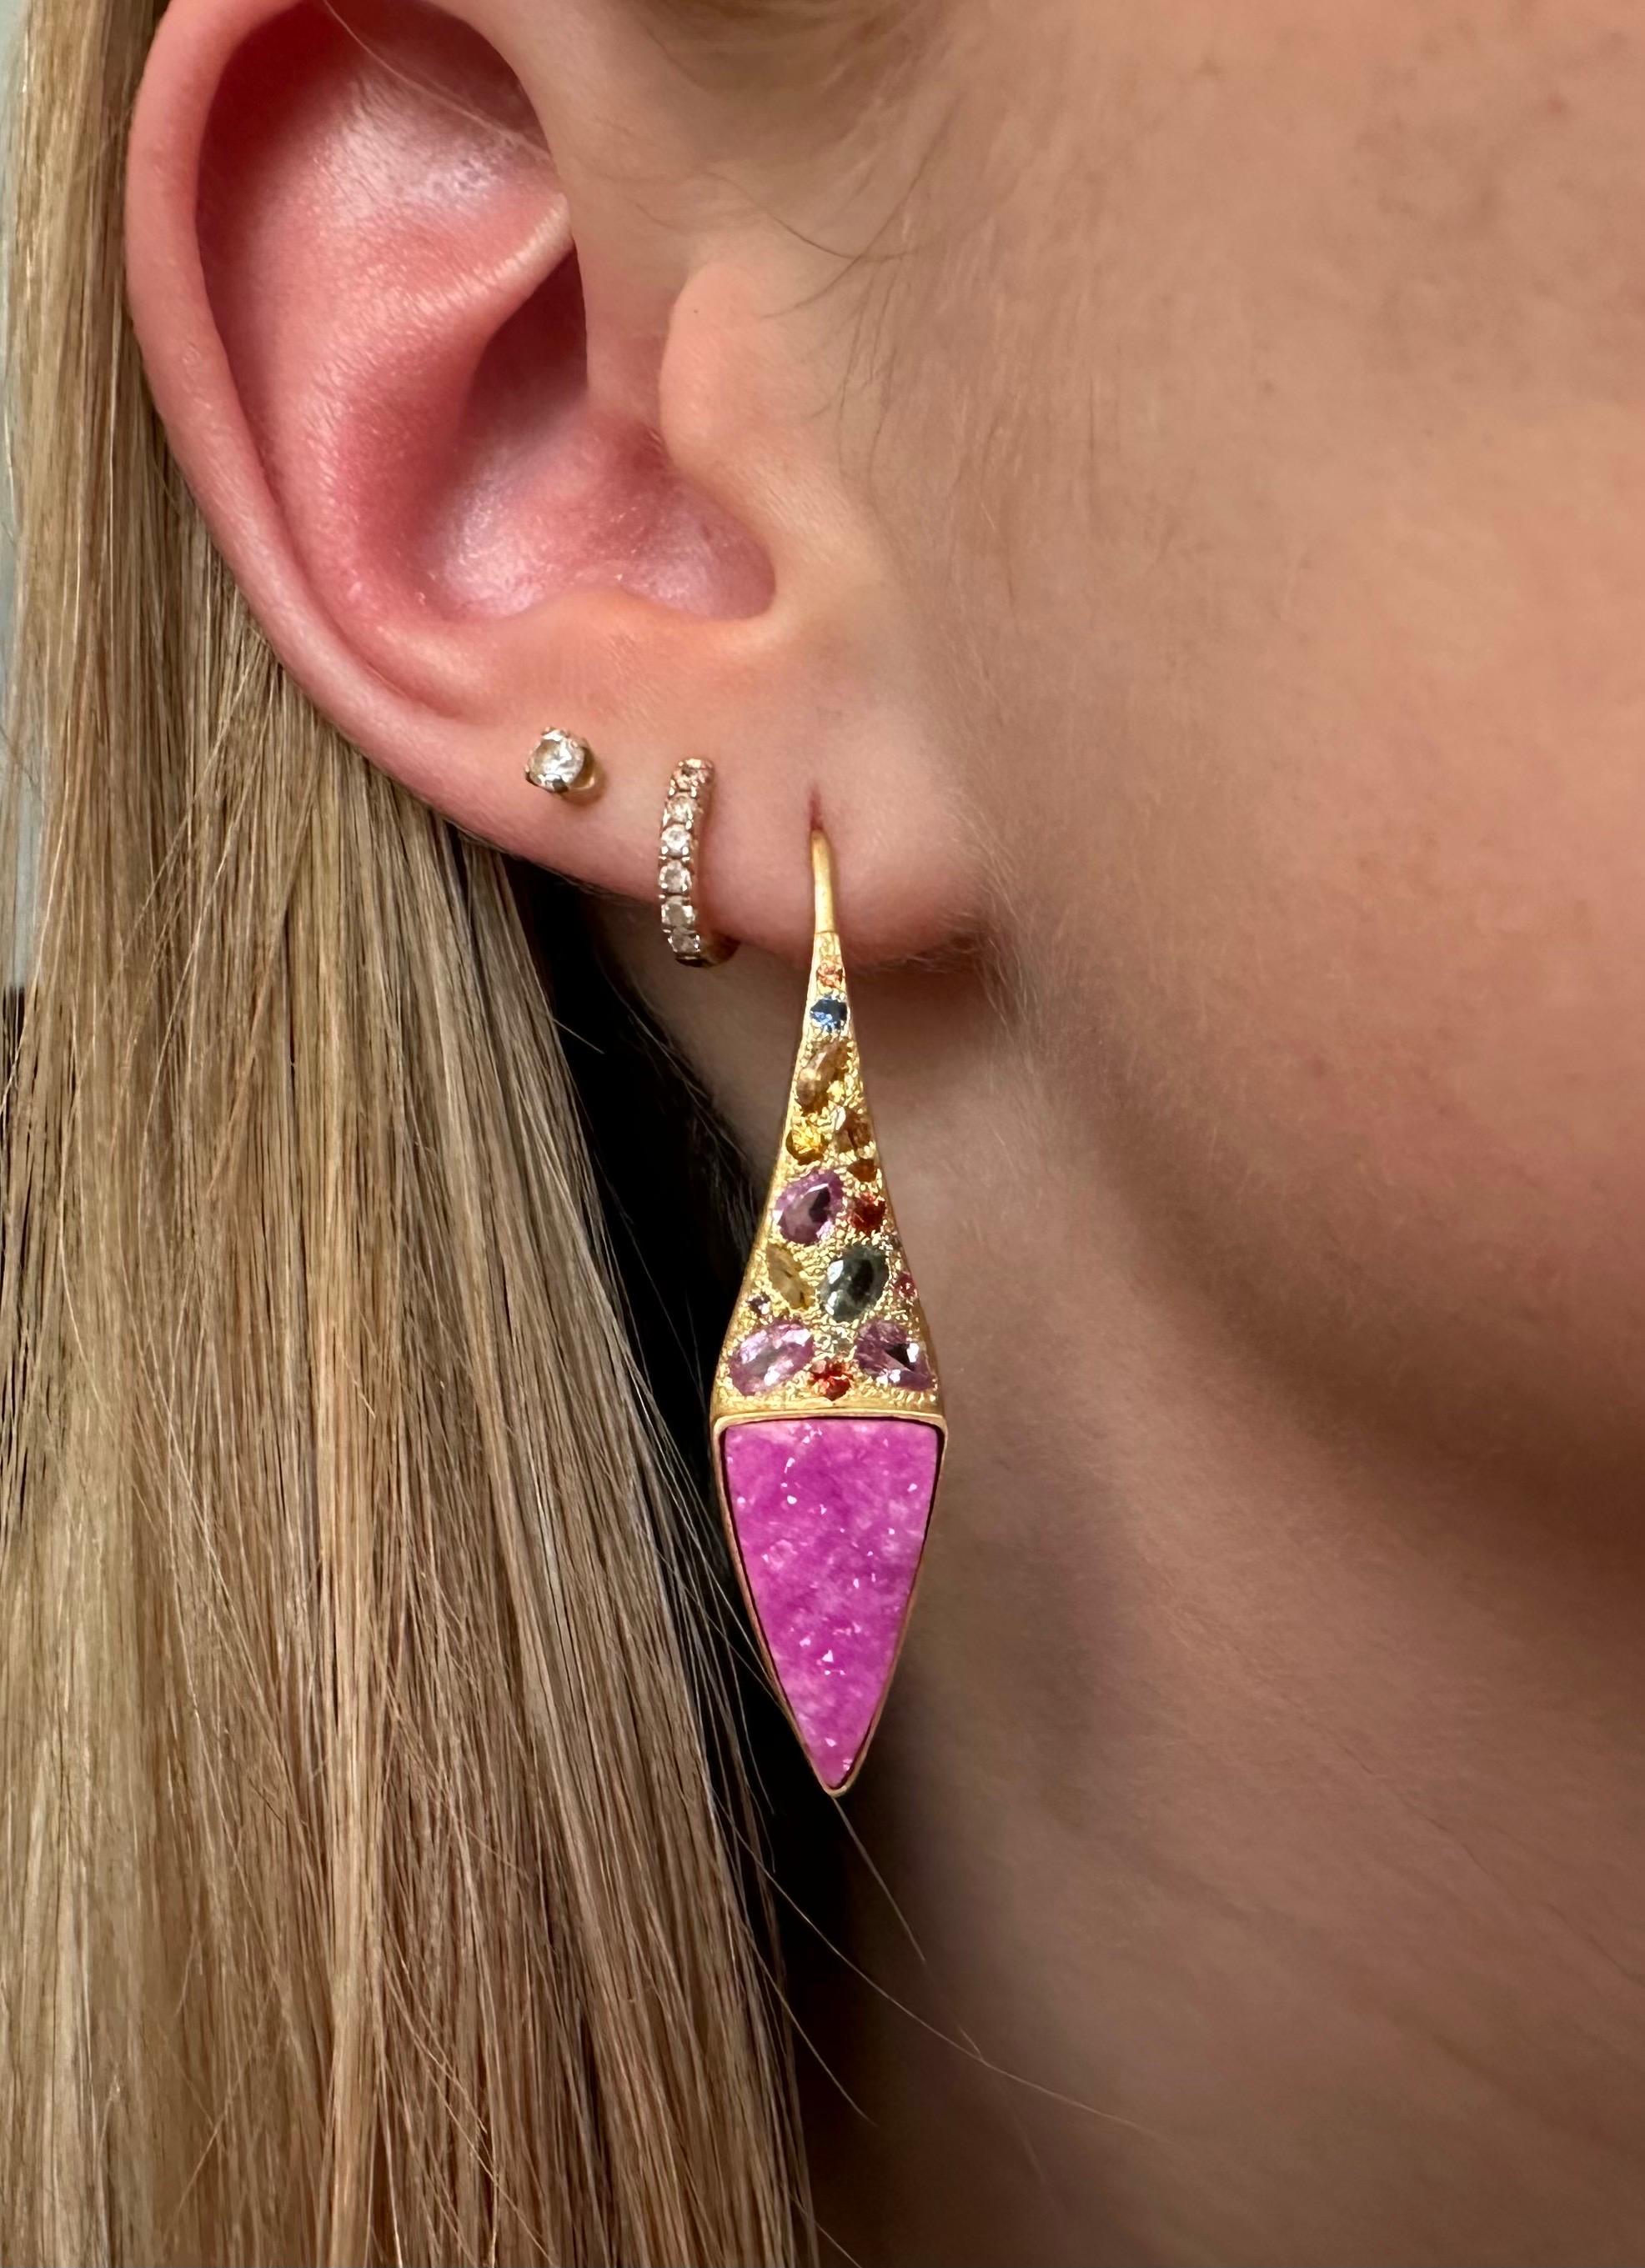 Artist Multicolored Sapphires, Pink Quartz and 18kt Gold Earrings by Lauren Harper For Sale